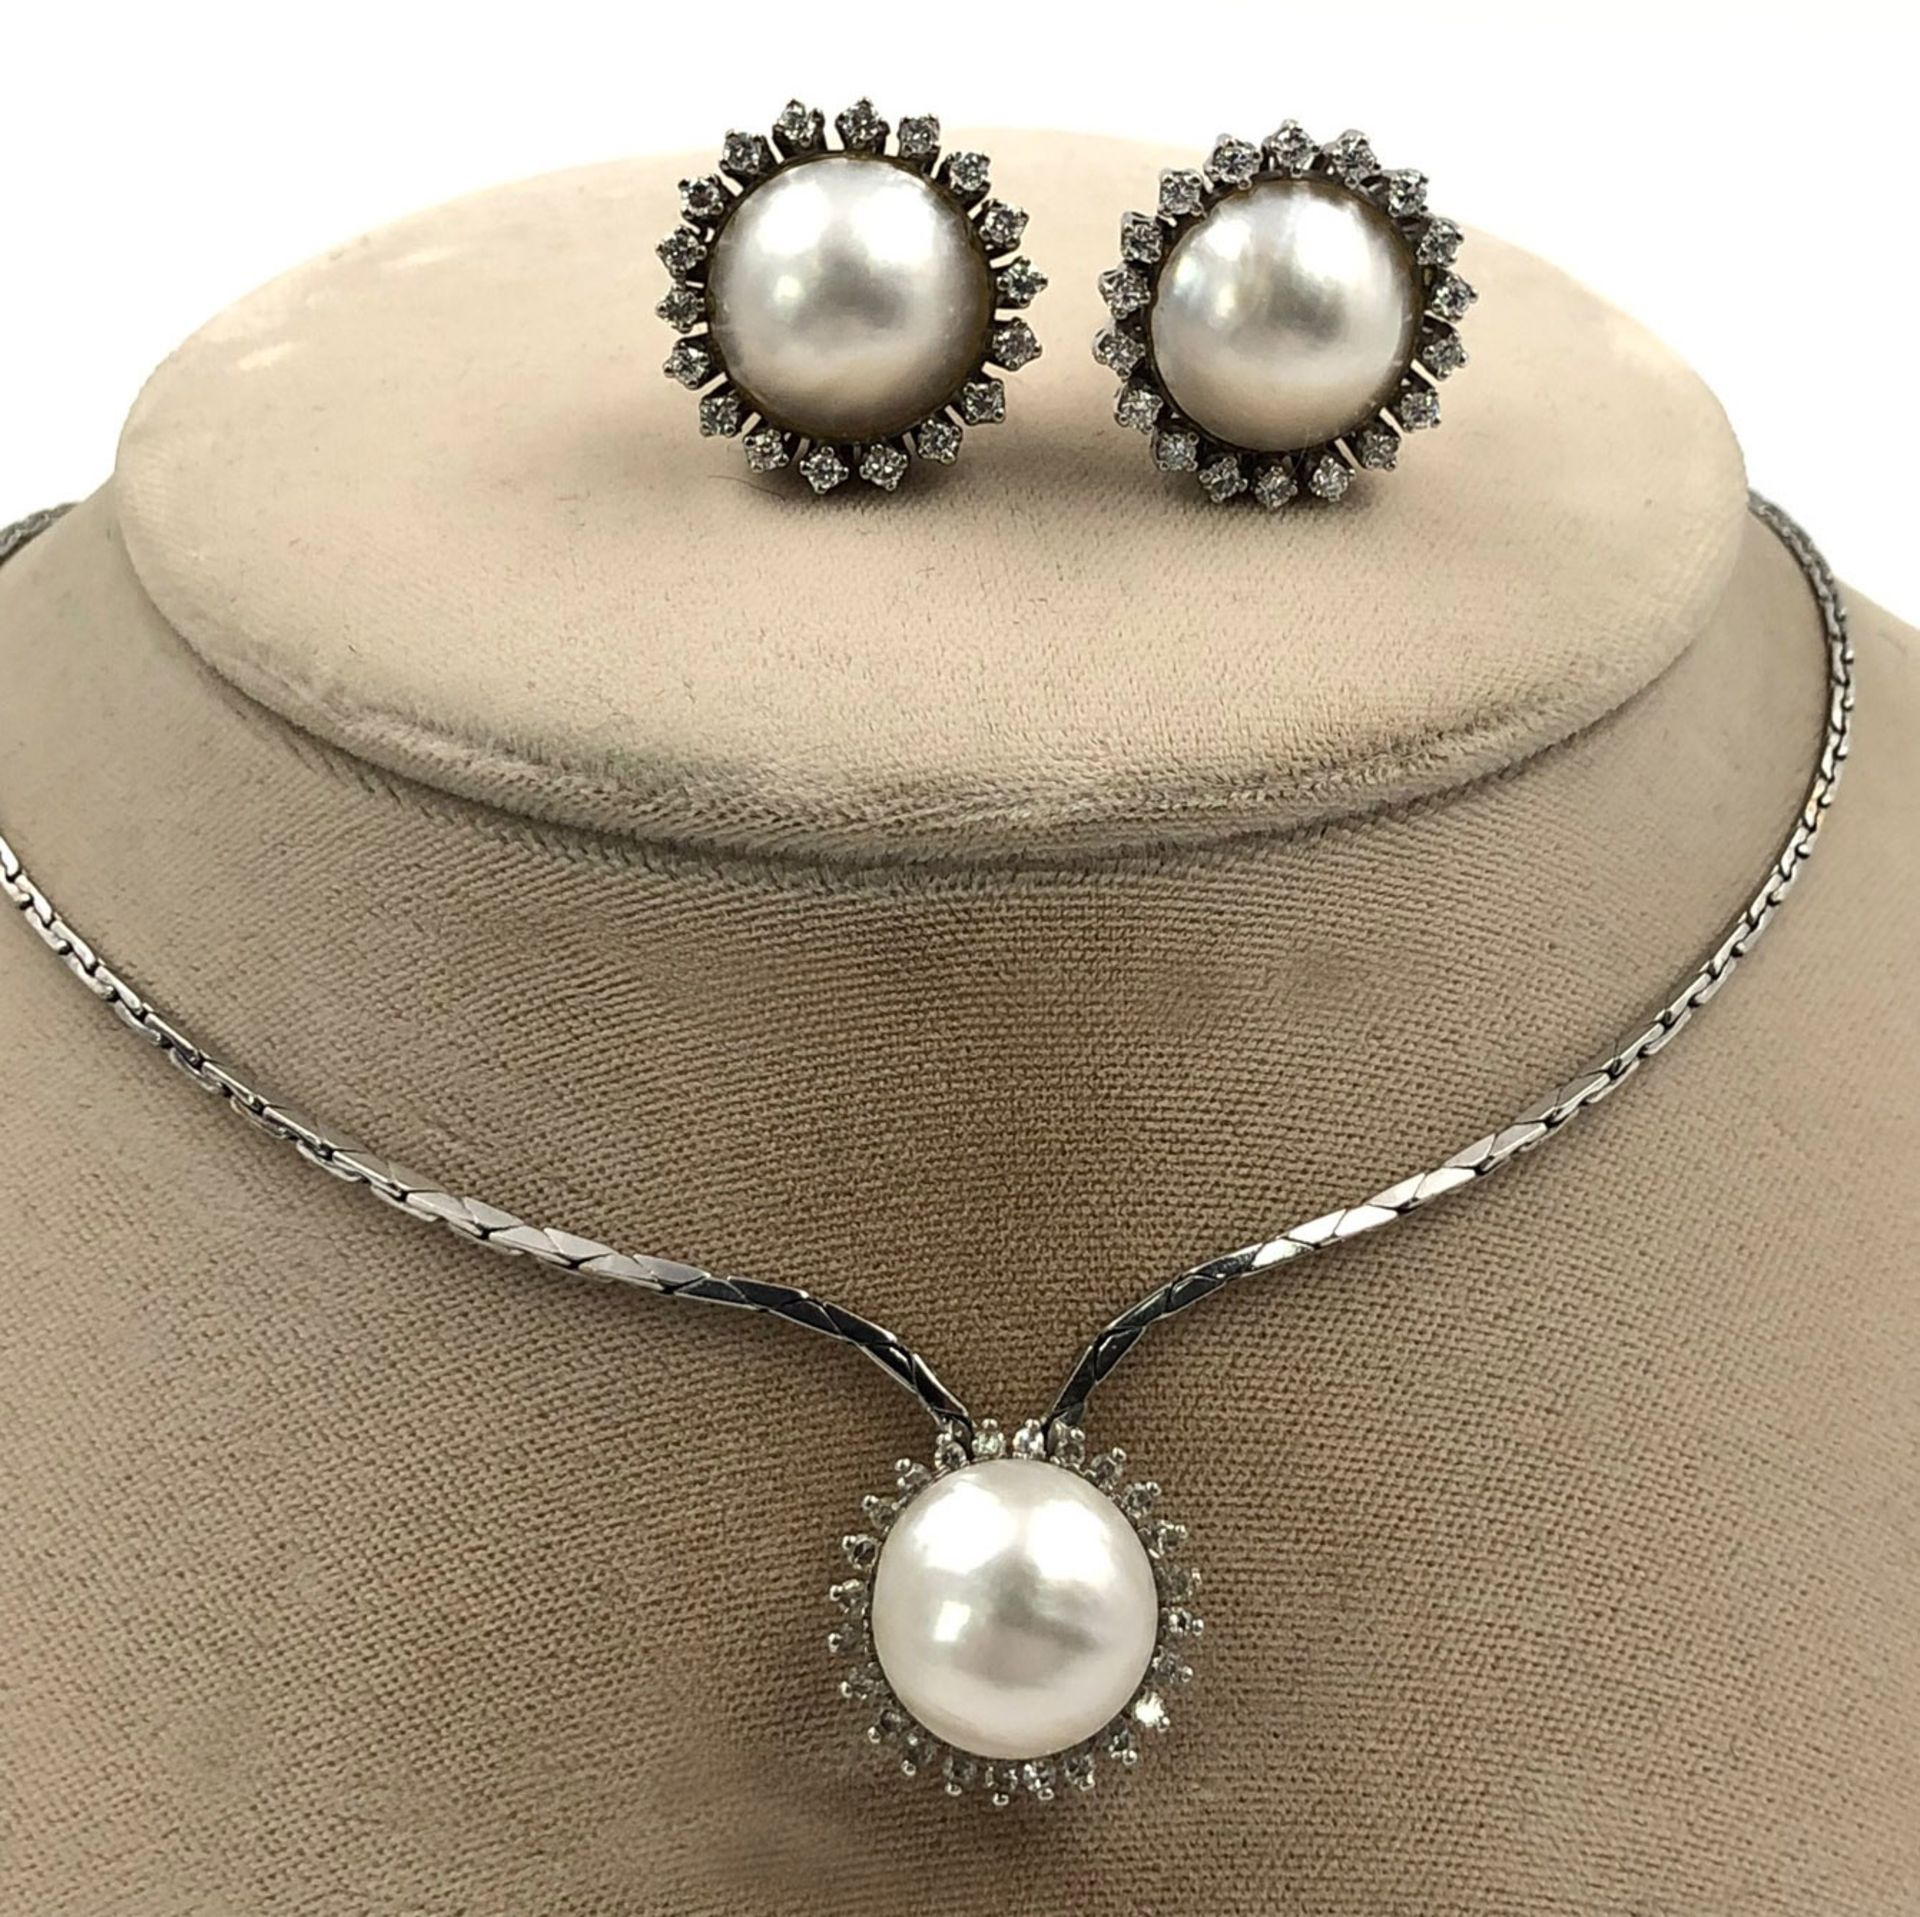 White gold 585. Necklace and 2 ear studs. Pearls probably Mabe. Diamonds.The diamonds together total